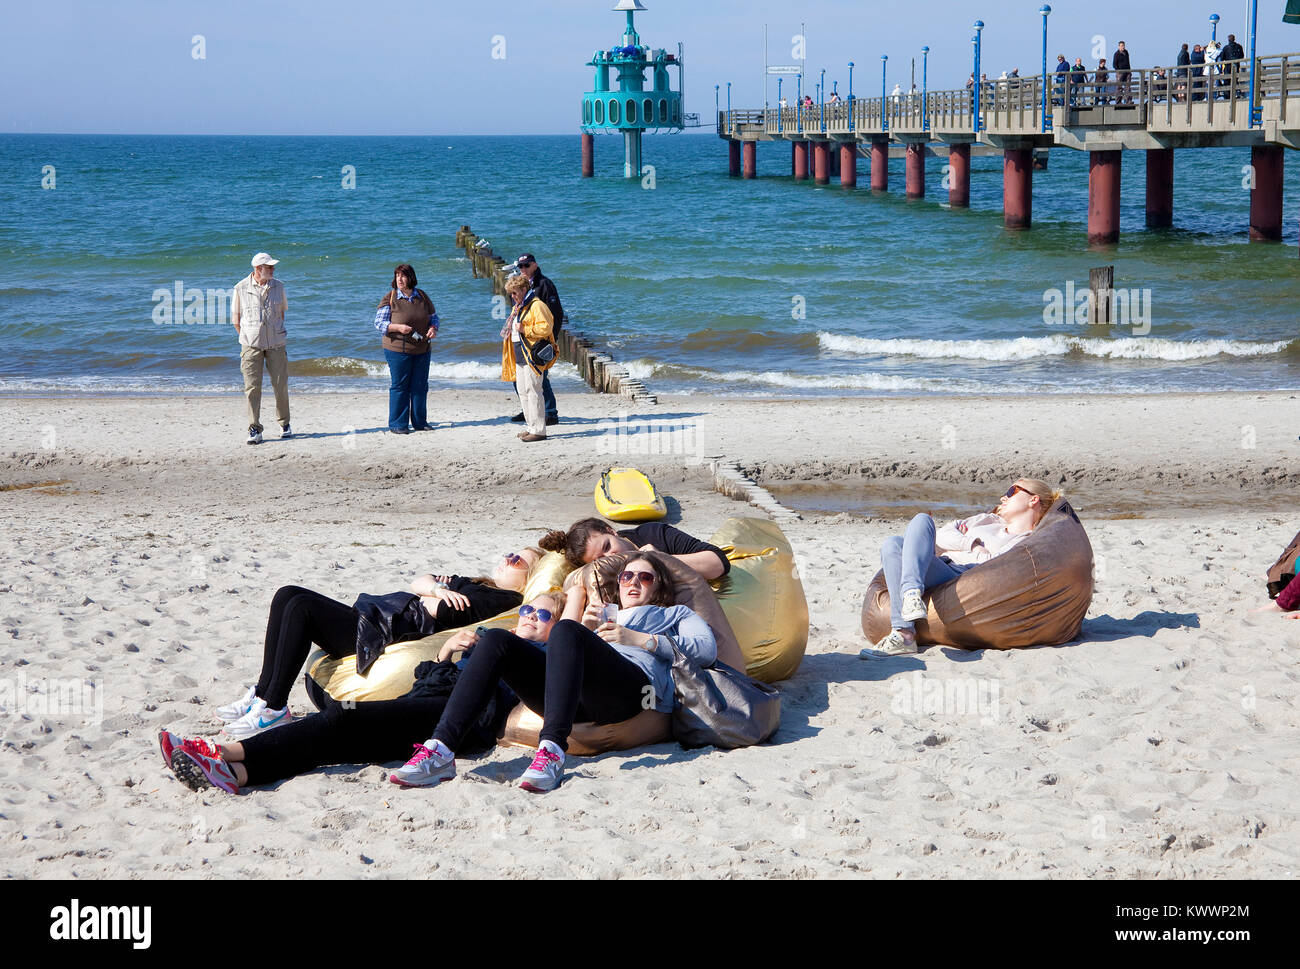 People relaxiing at the beach, pier of Zingst, Fishland, Mecklenburg-Western Pomerania, Baltic sea, Germany, Europe Stock Photo